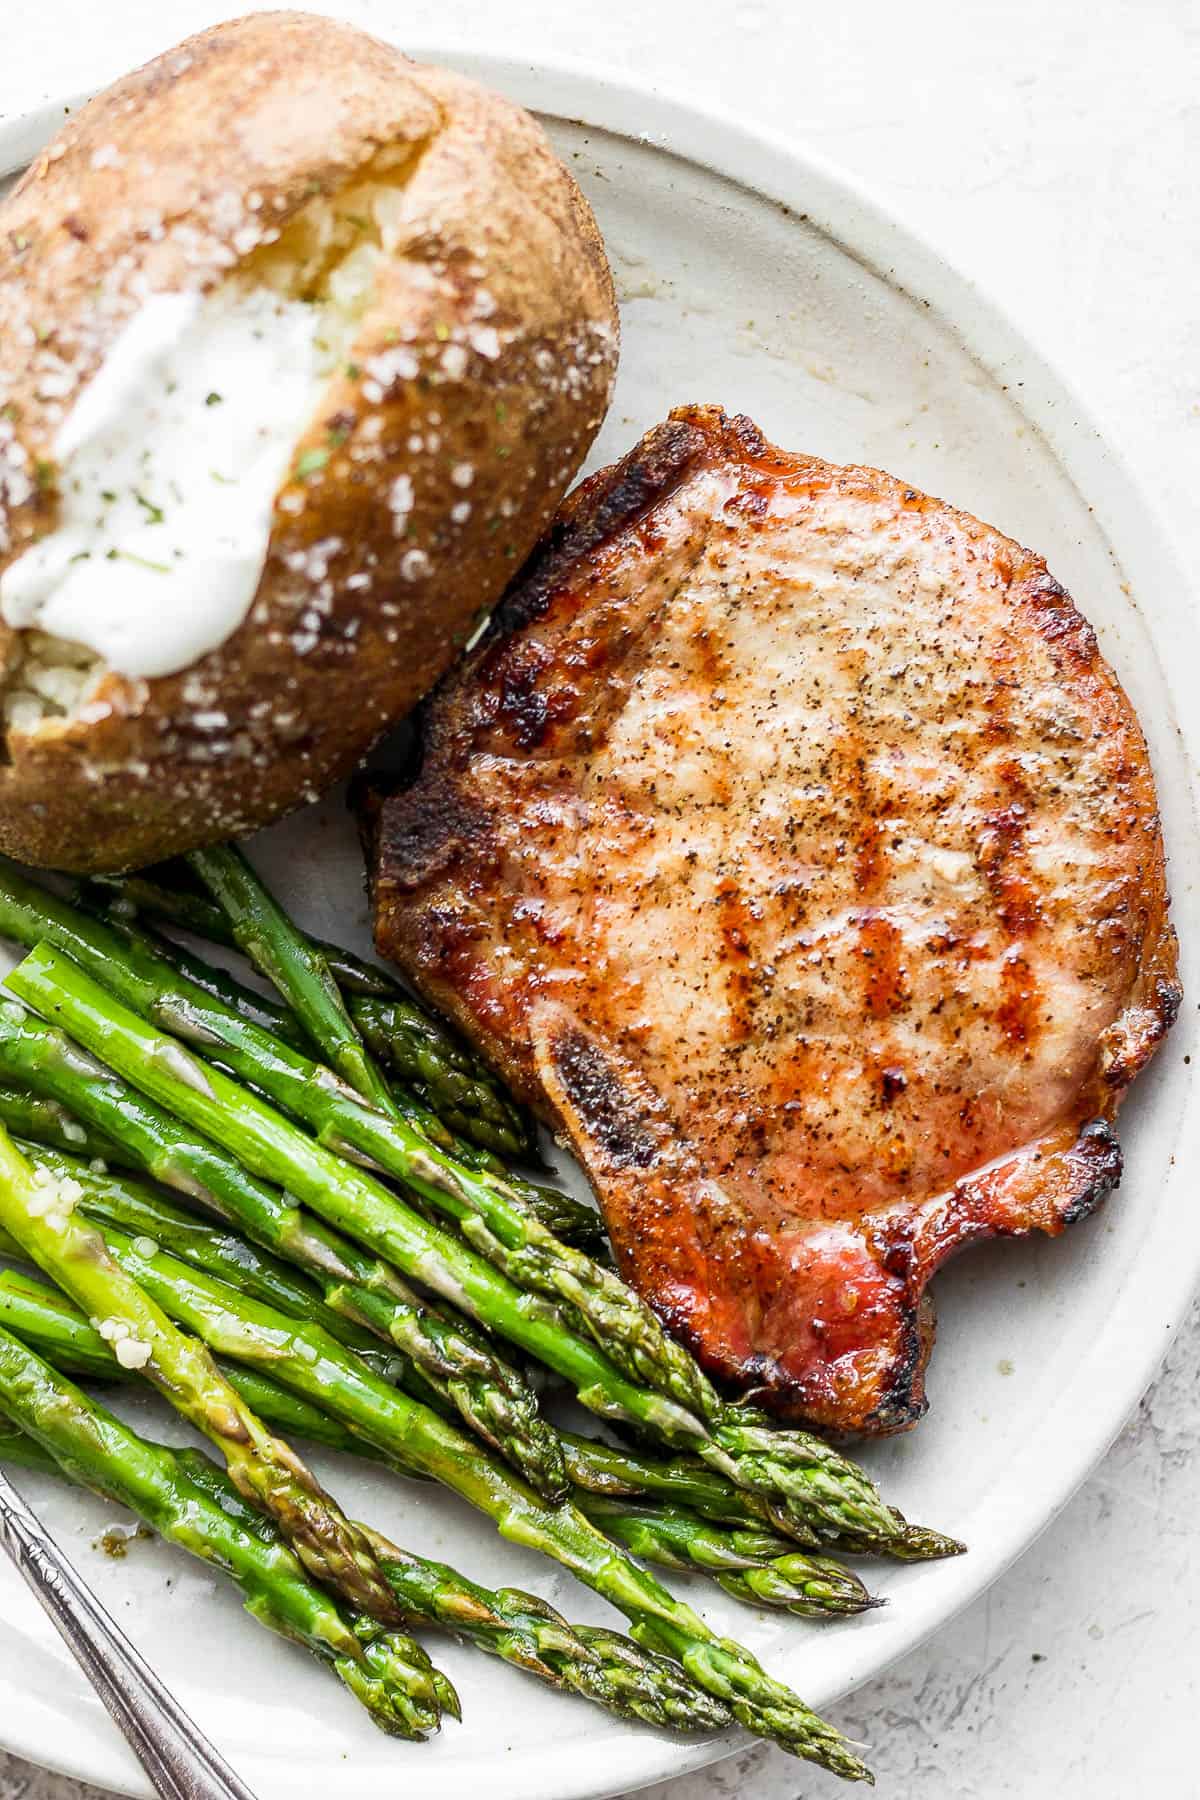 Plate with smoked pork chop, baked potato and asparagus on it. 